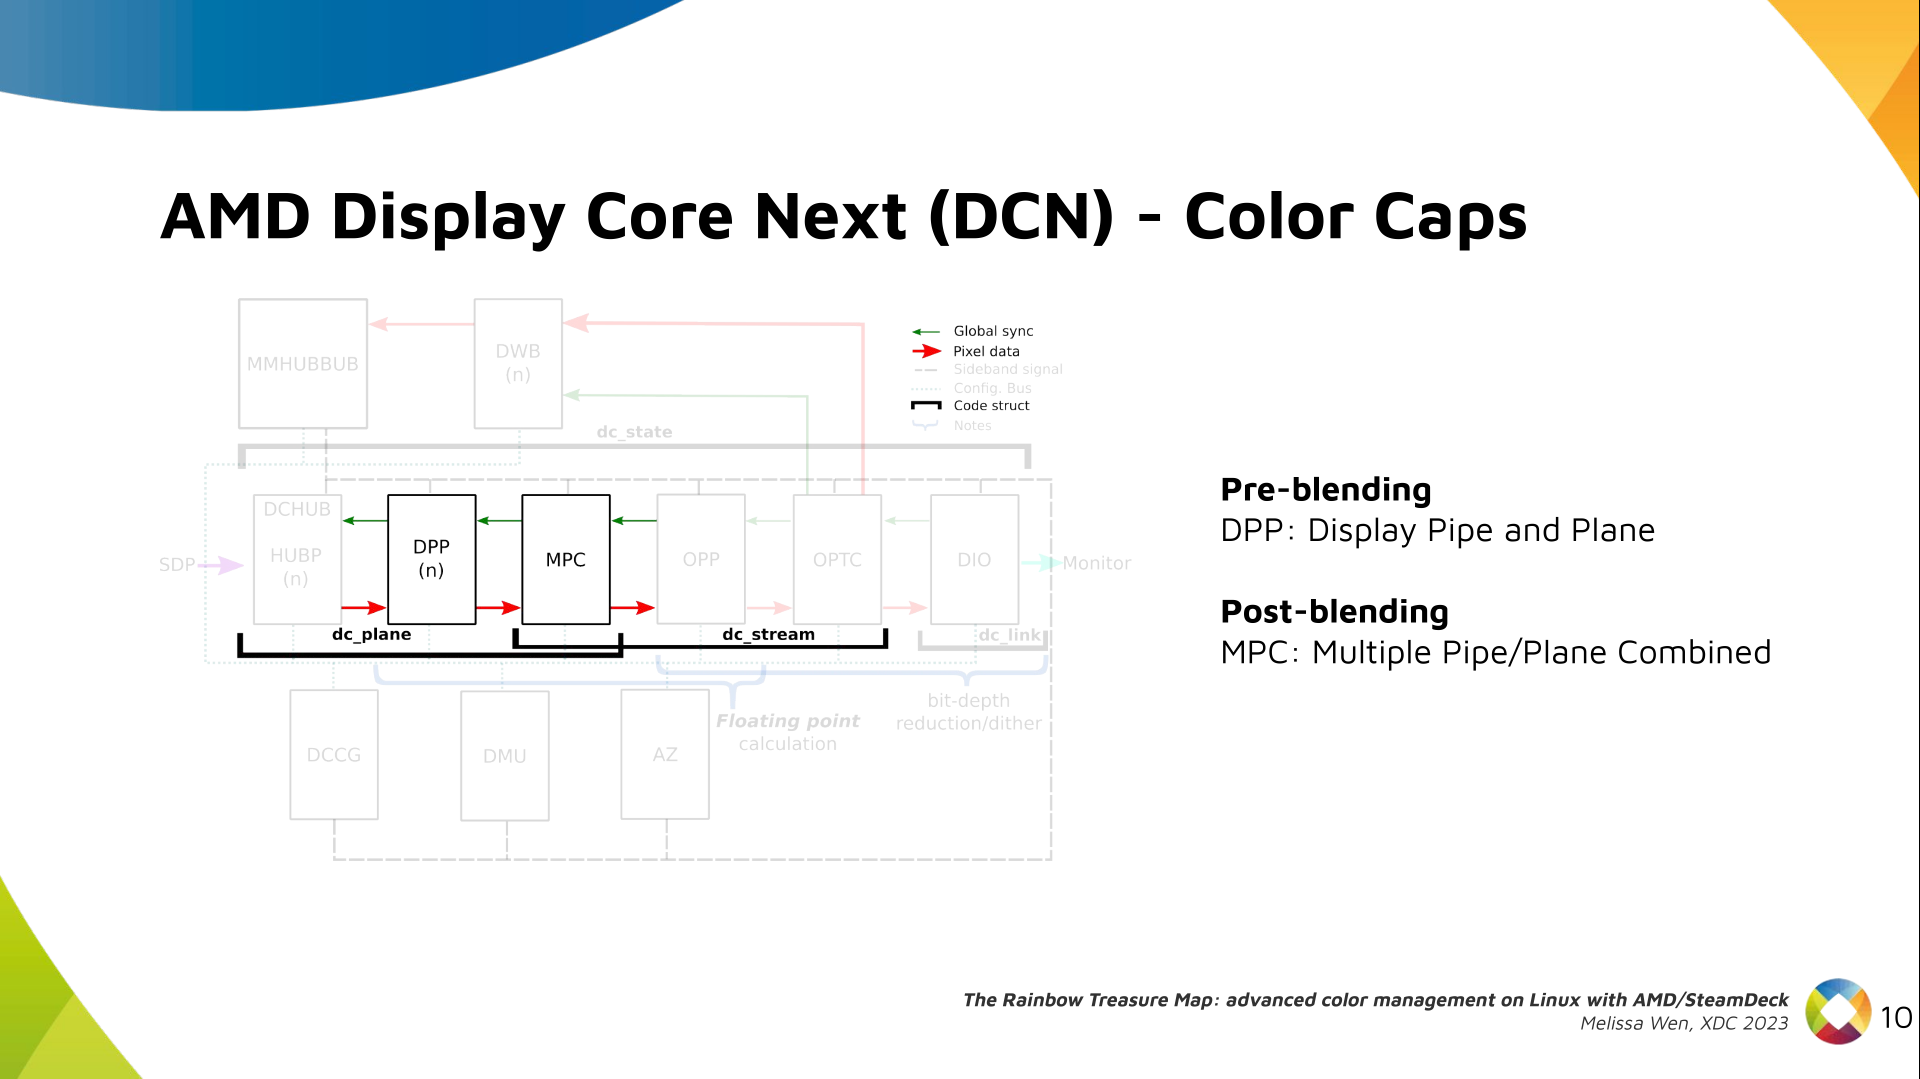 Slide 10: Diagram of the AMD Display Core Next where only DPP and MPC blocks are highlighted